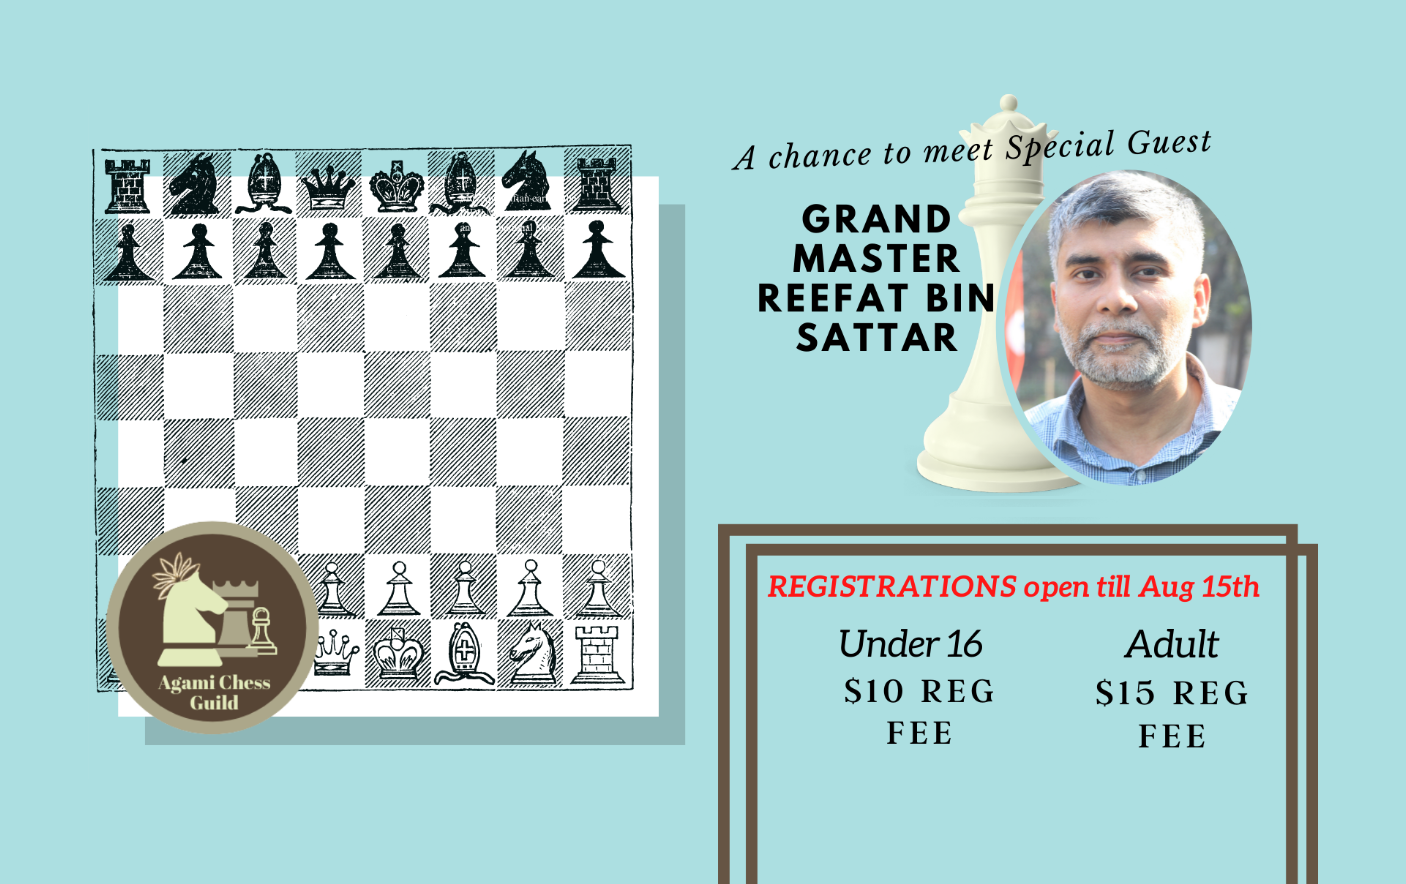 Agami Chess Guild Online Charity Tournament 2021 — Agami Inc